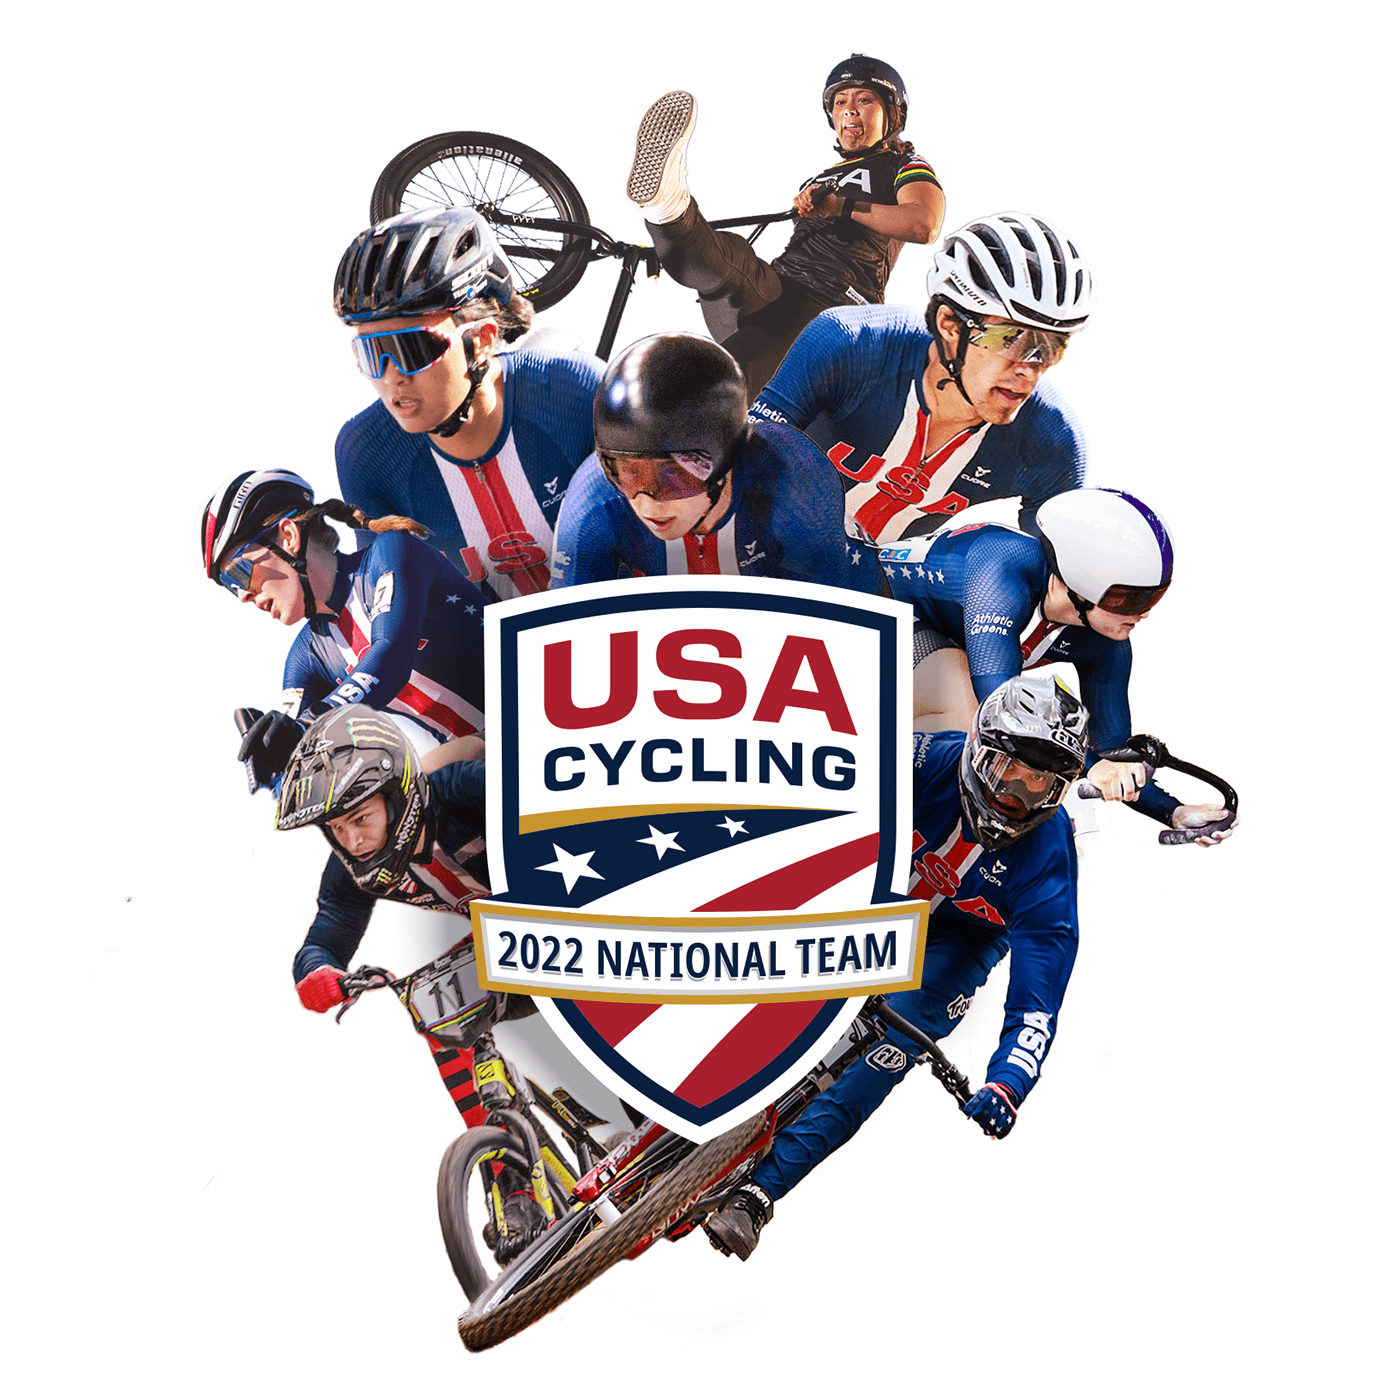 USA Cycling 2022 team announcement c
composite image created using photoshop